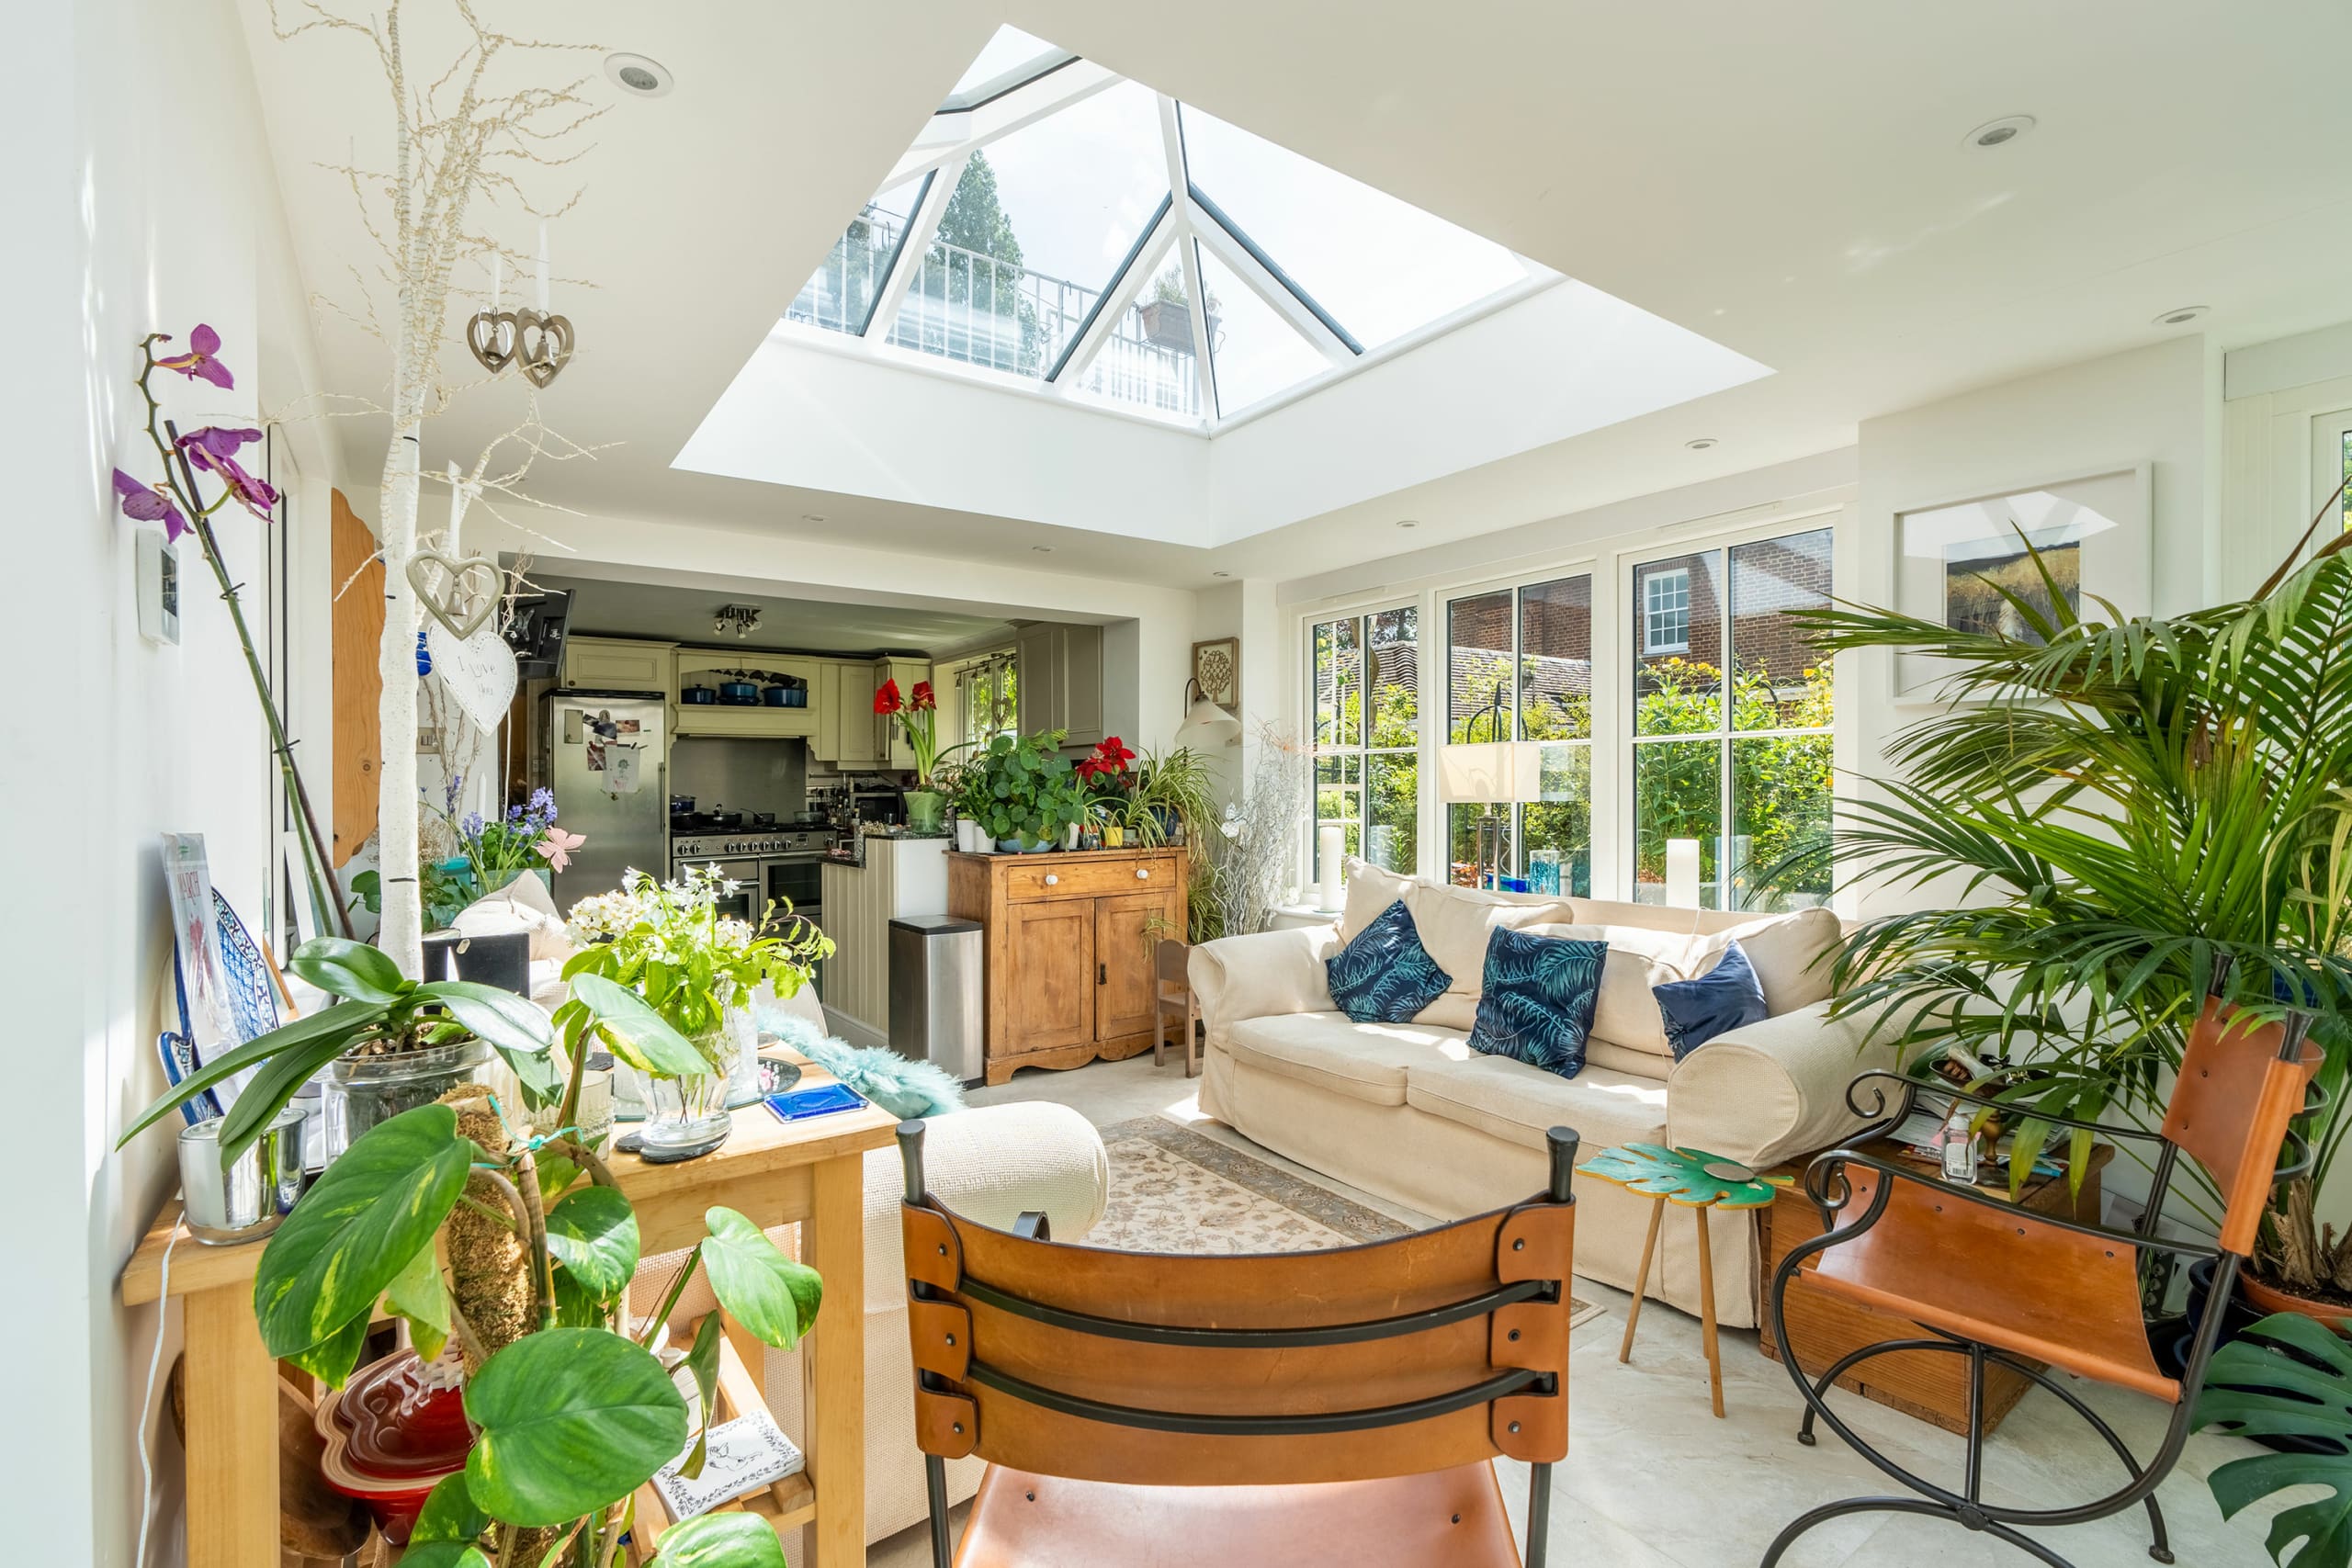 Interior of a stunning garden room with roof lantern.